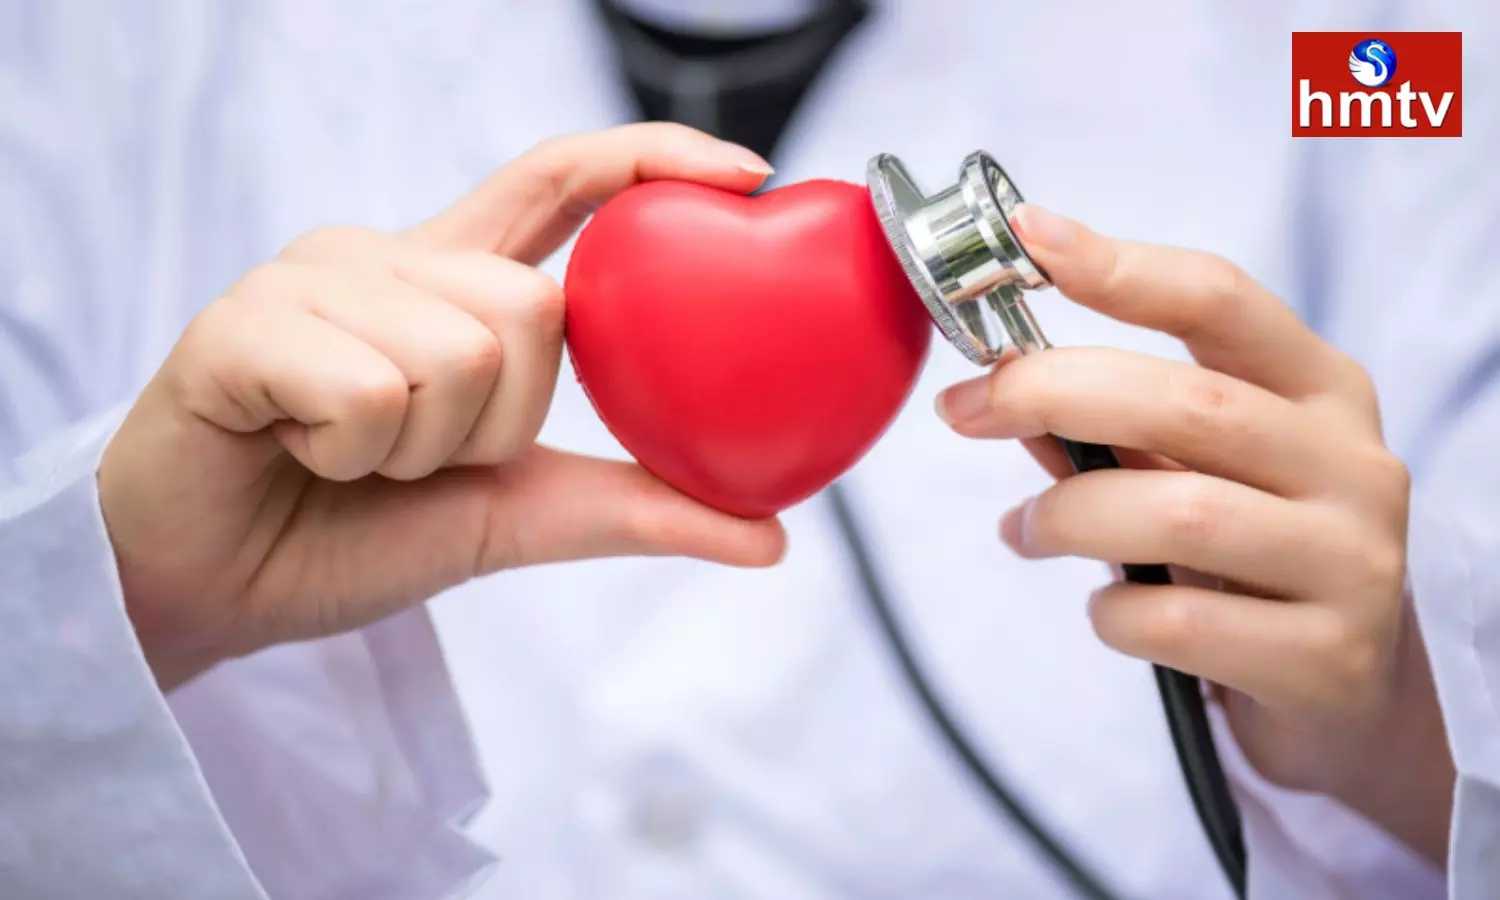 Follow these tips to keep your heart healthy